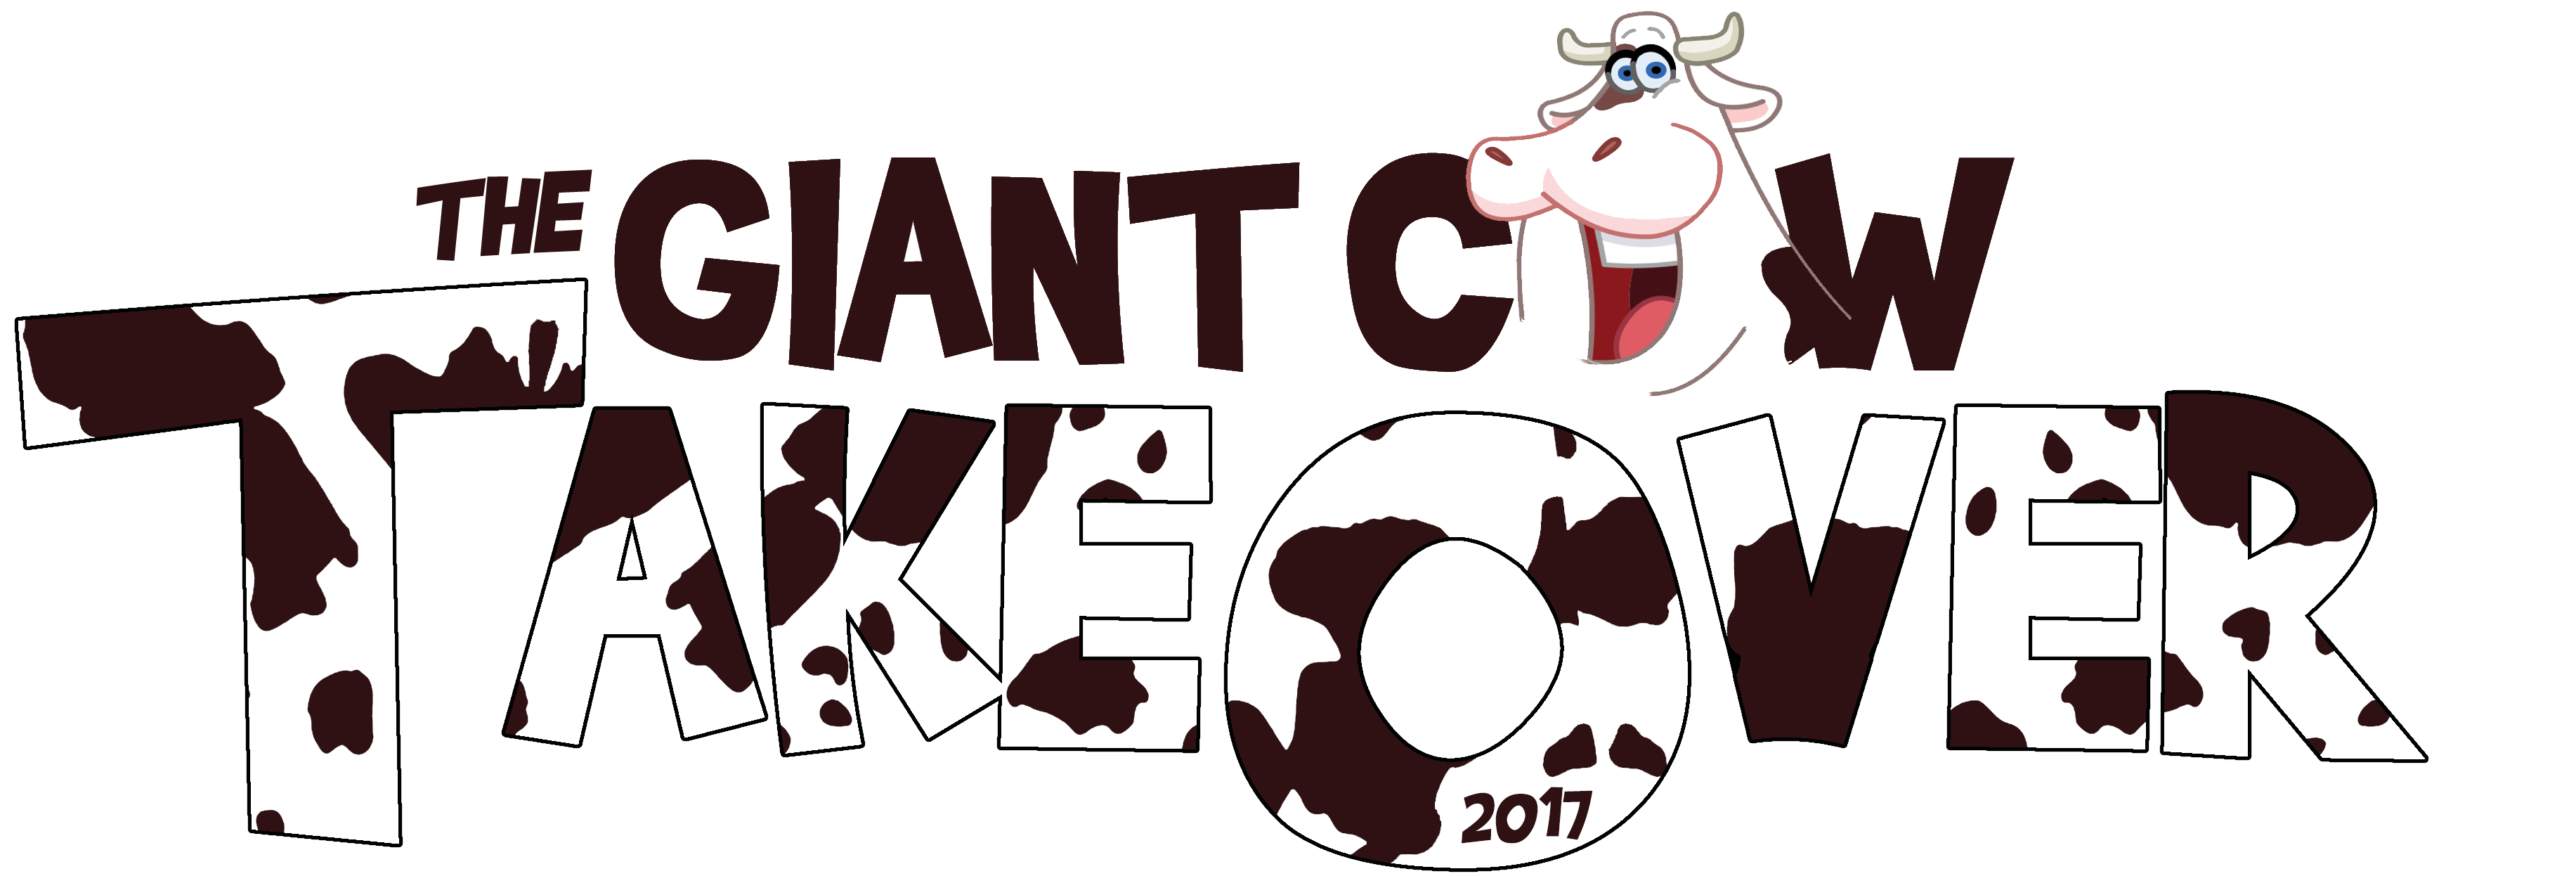 The cow takes over. Excited clipart excitment